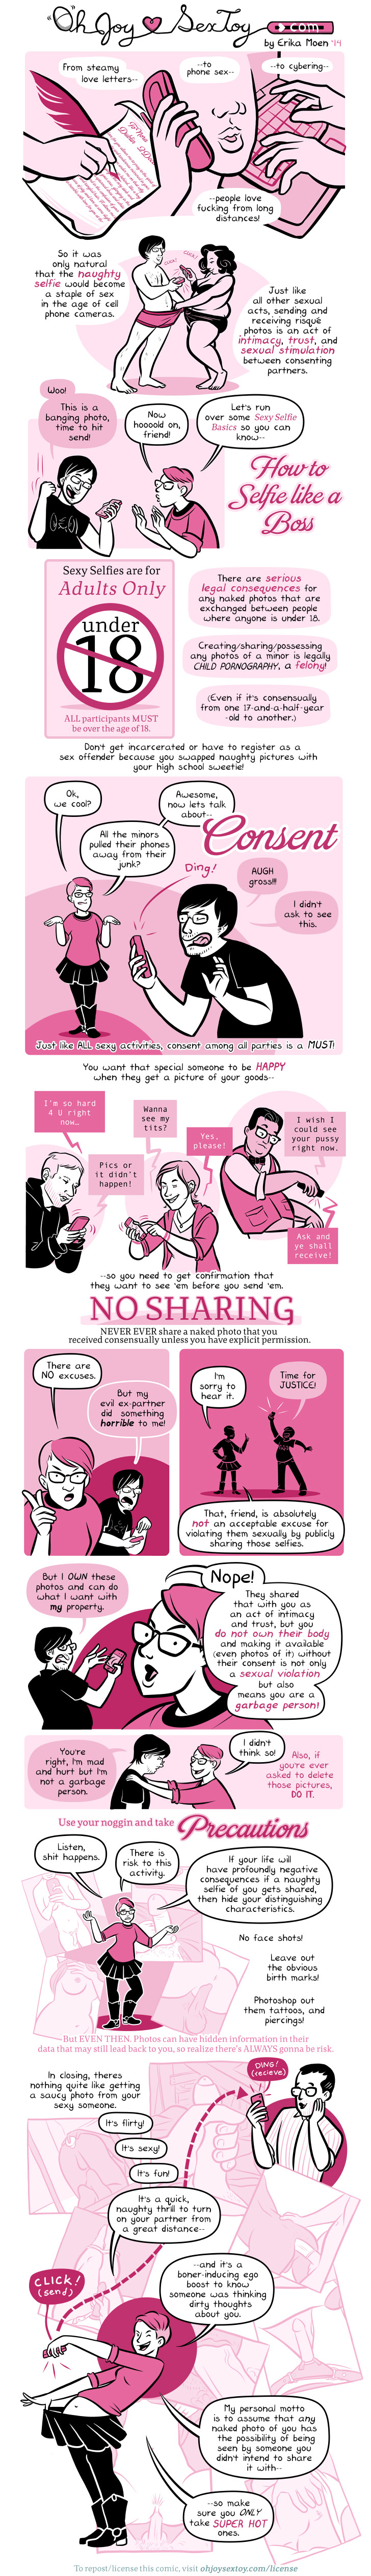 the comic lays out the rules for sending sexy photos—never share them without consent, don't send them if you're under 18, and make sure the person who's receiving your photo actually wants to see it. 